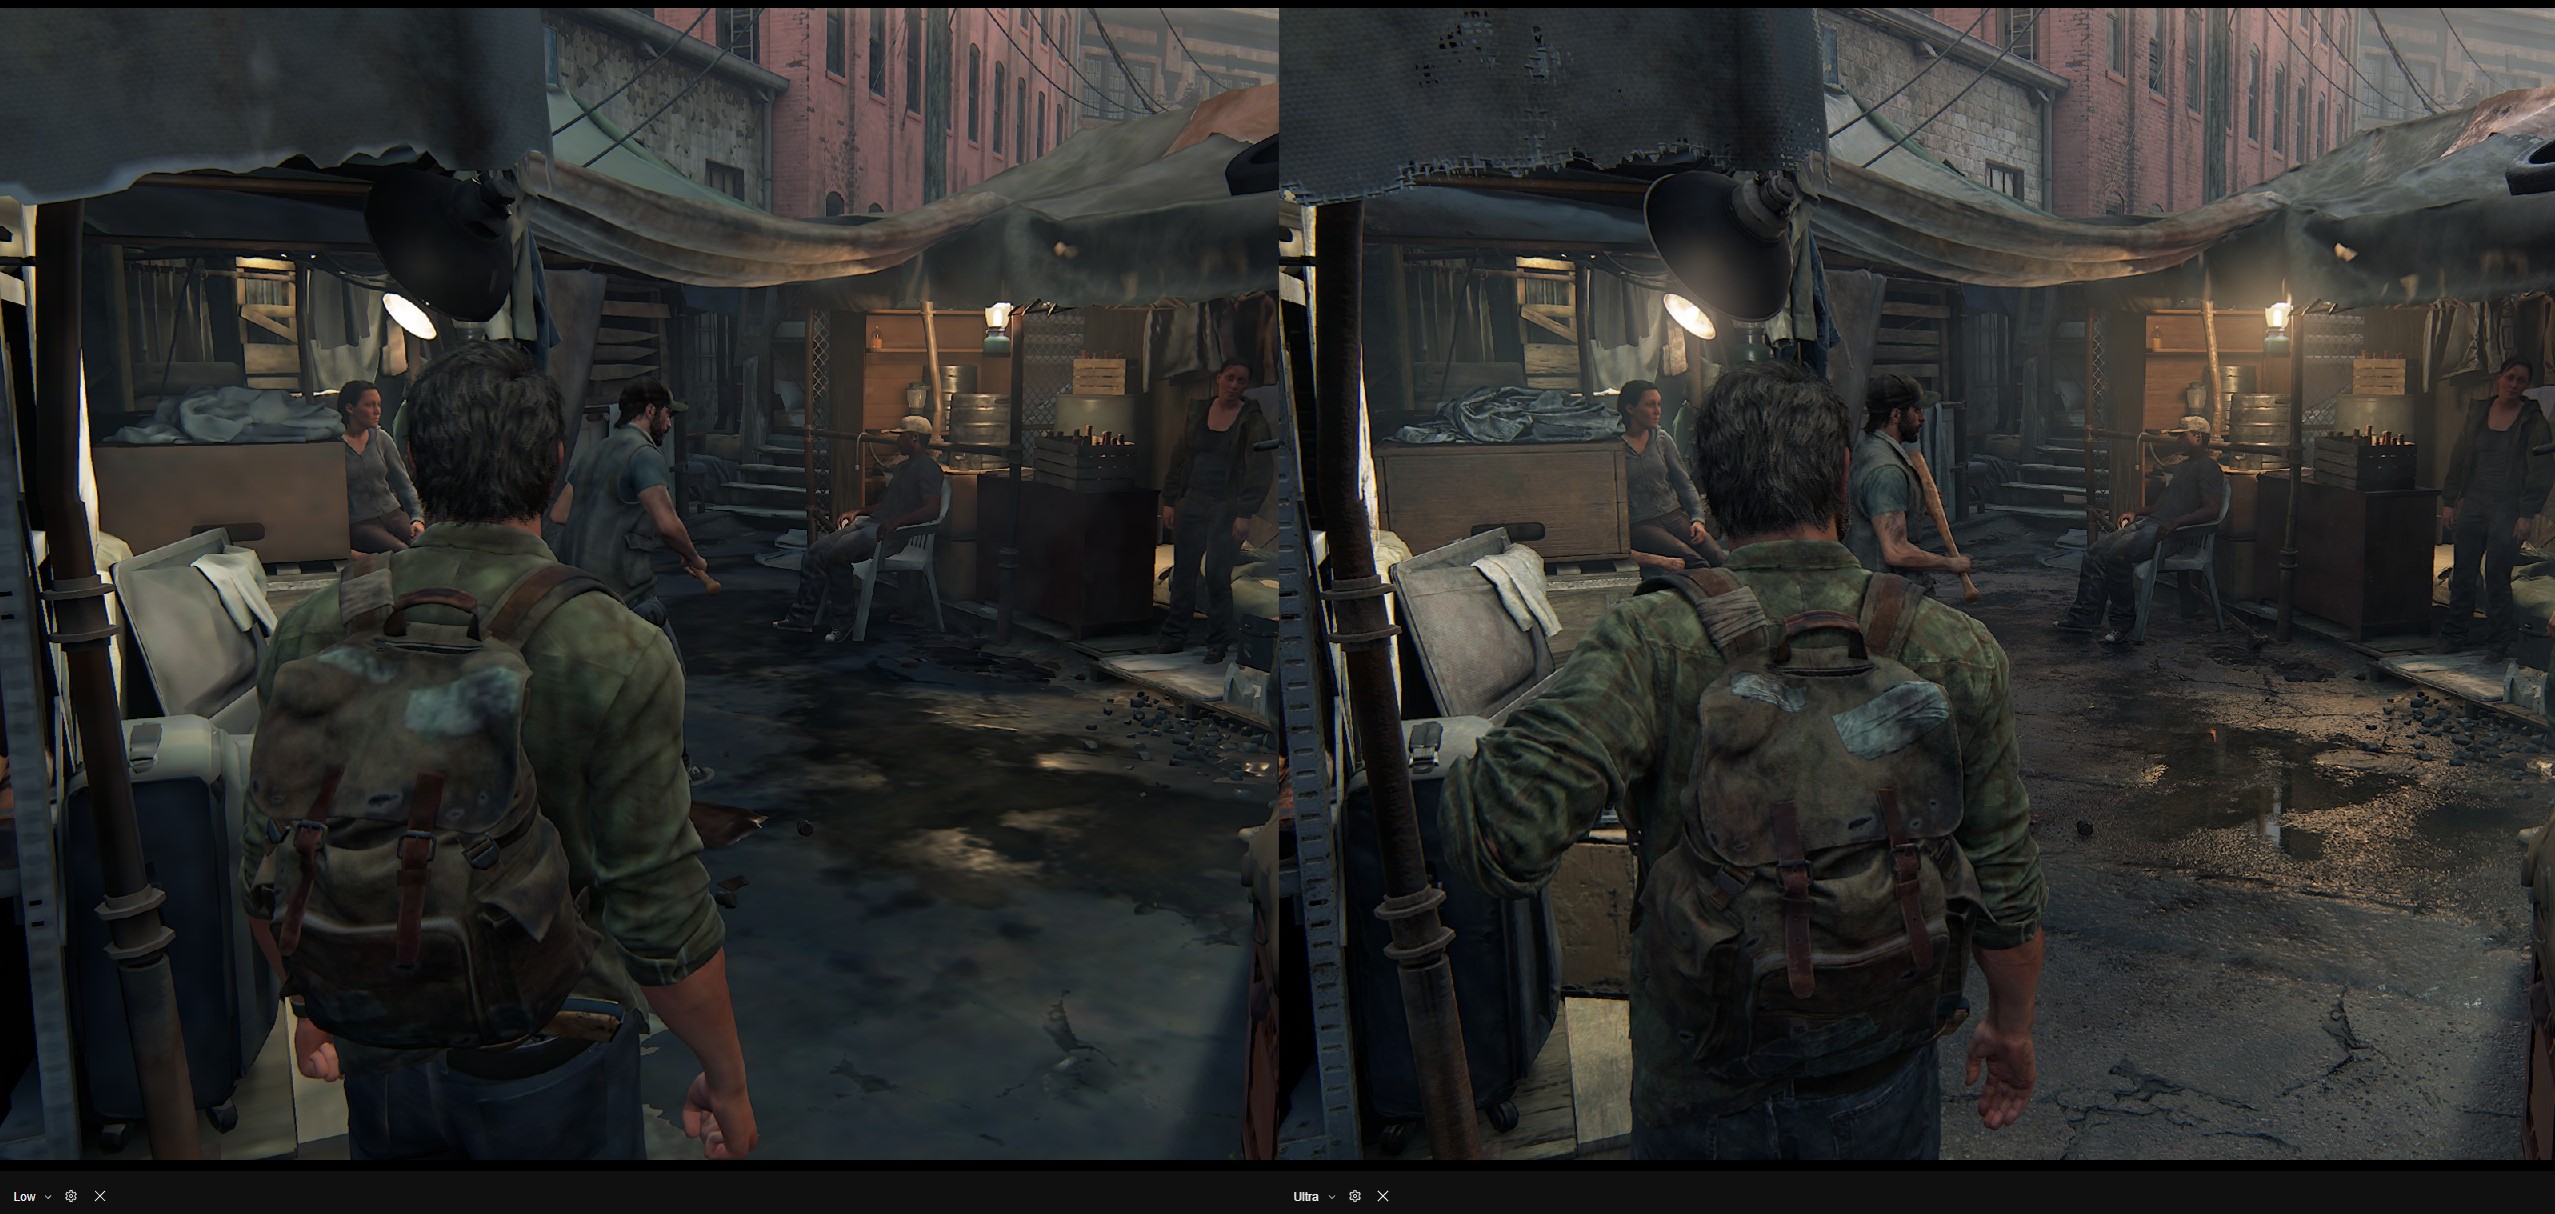 The Last of Us on PC in September? - Overclocking.com